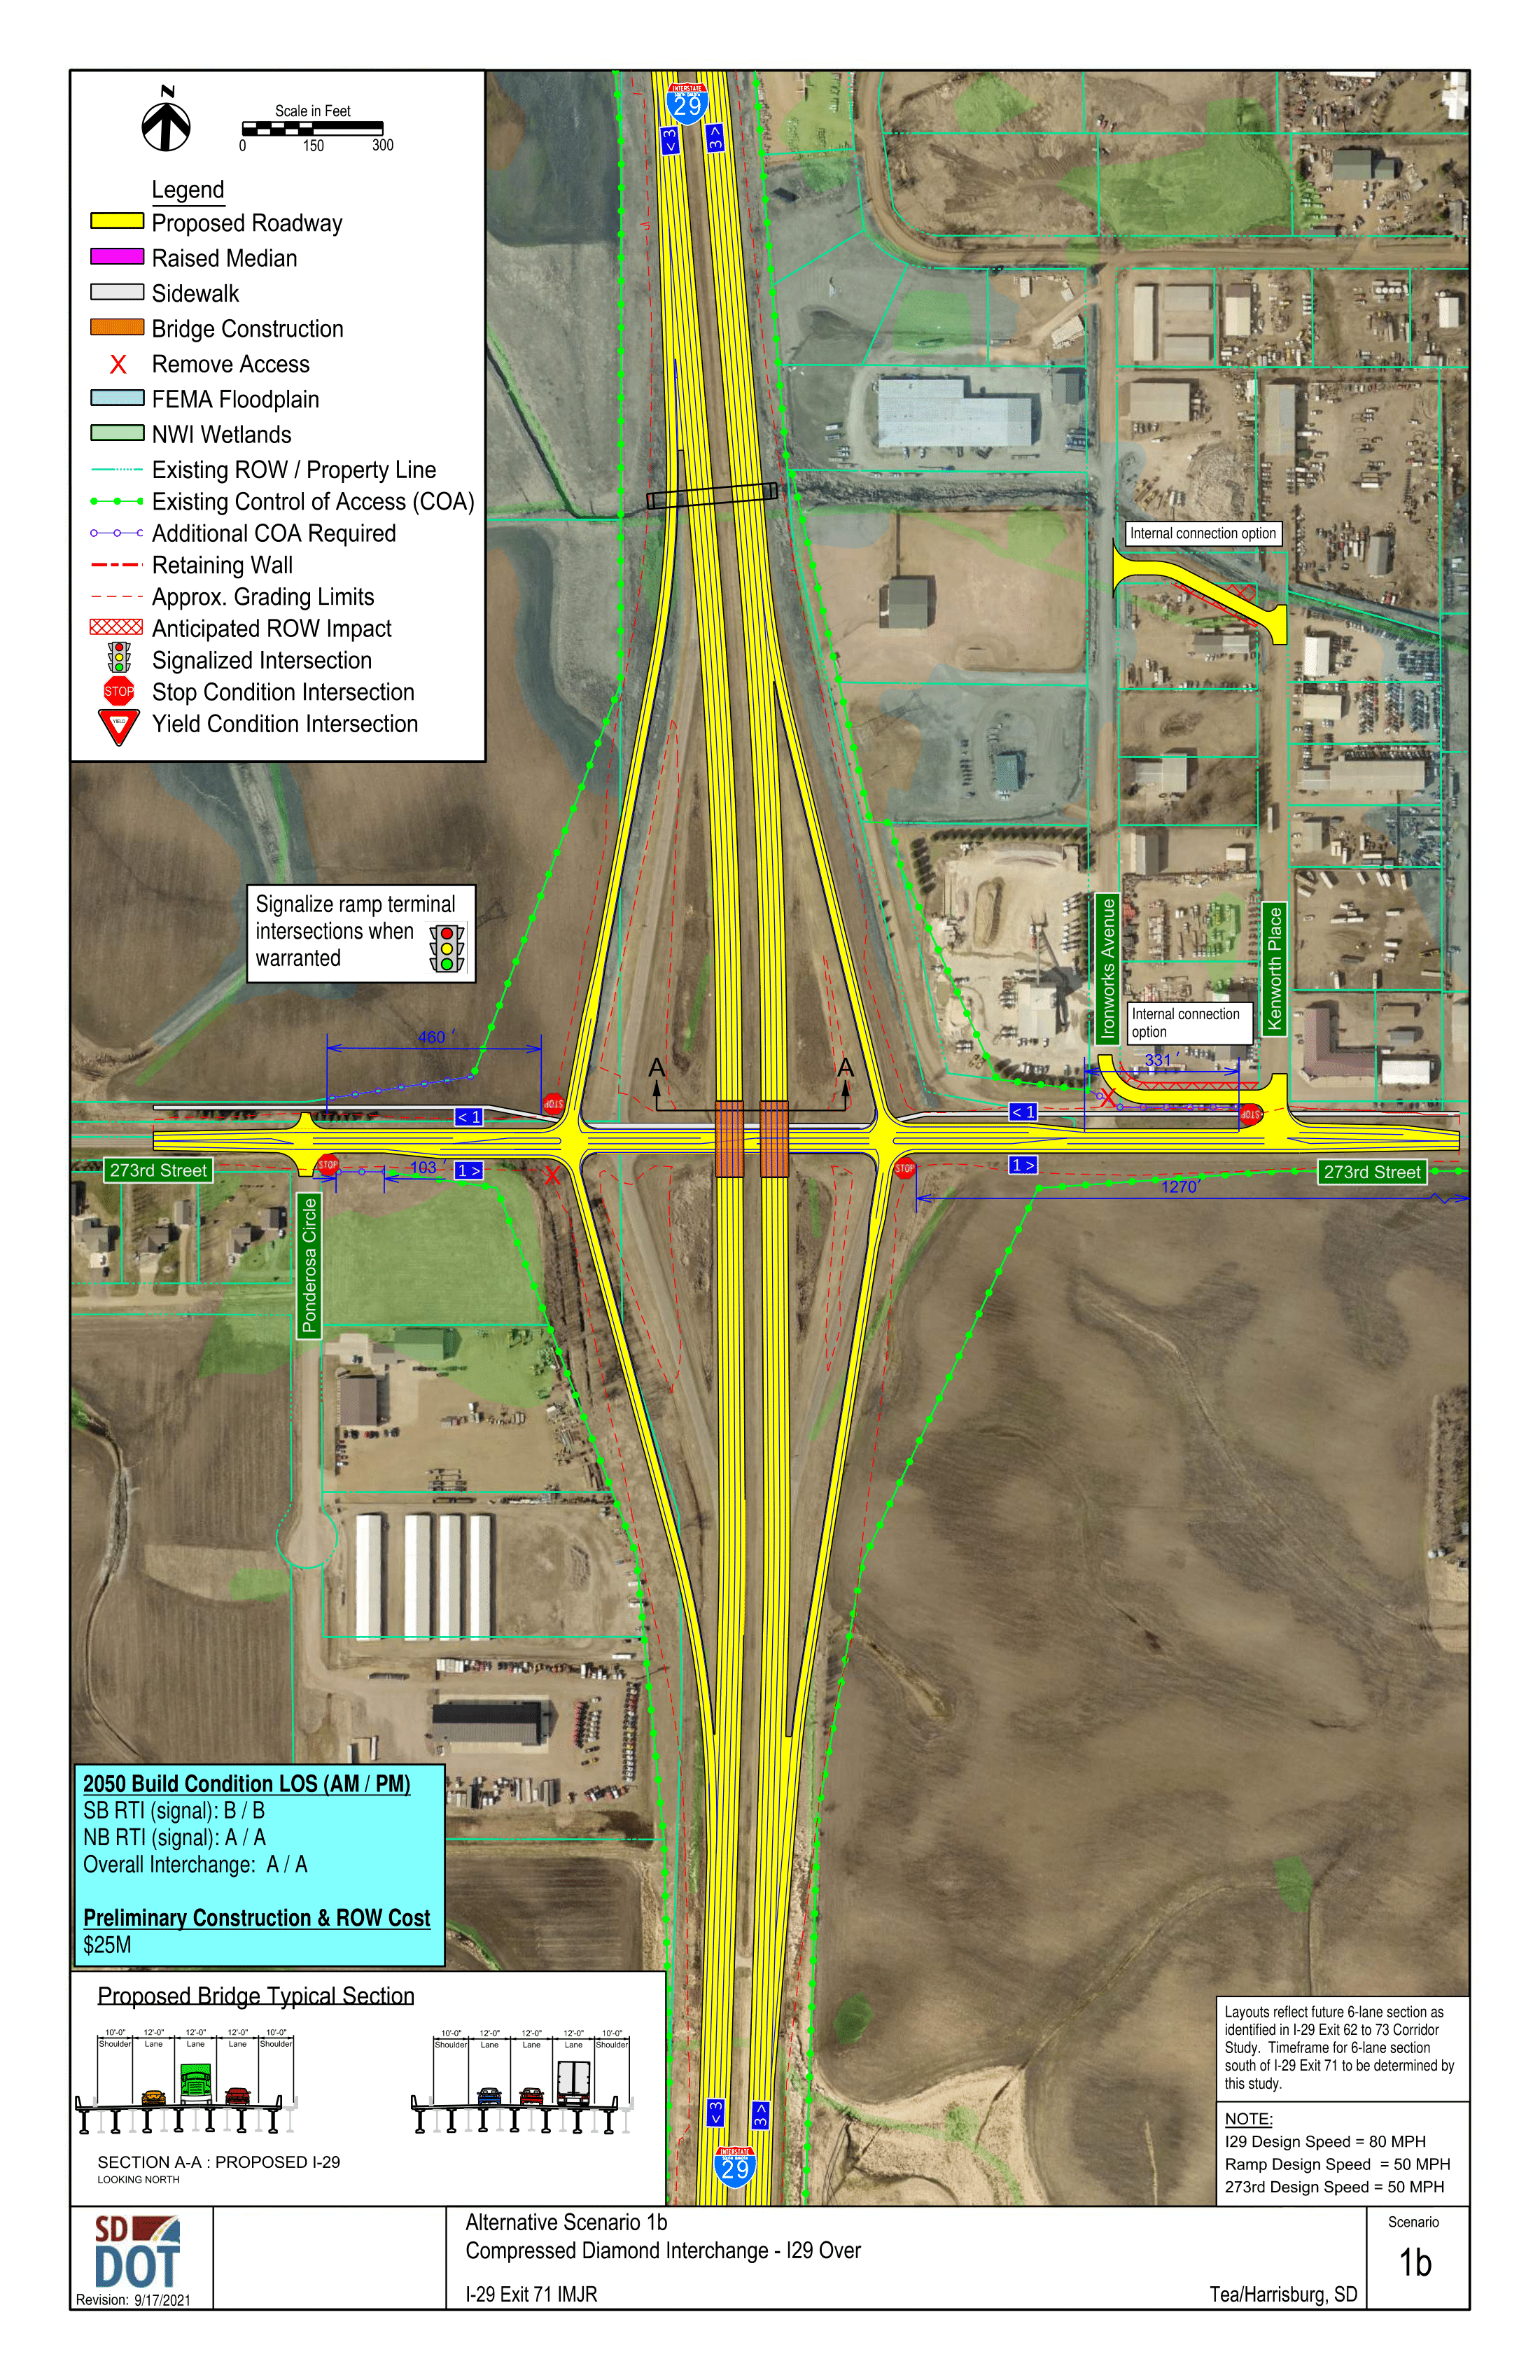 This image shows the conceptual layout of a Compressed Diamond Interchange, and what the road over it would look like. Details on the diagram include proposed roadway, raised median, sidewalk, bridge construction, access control, FEMA floodplain, NWI wetlands, existing Right of Ways and property lines, existing control of access points, additional control of access points needed, retaining walls, grading limits, anticipated right of way impacts, signalized intersections, stop condition intersections and yield condition intersections.